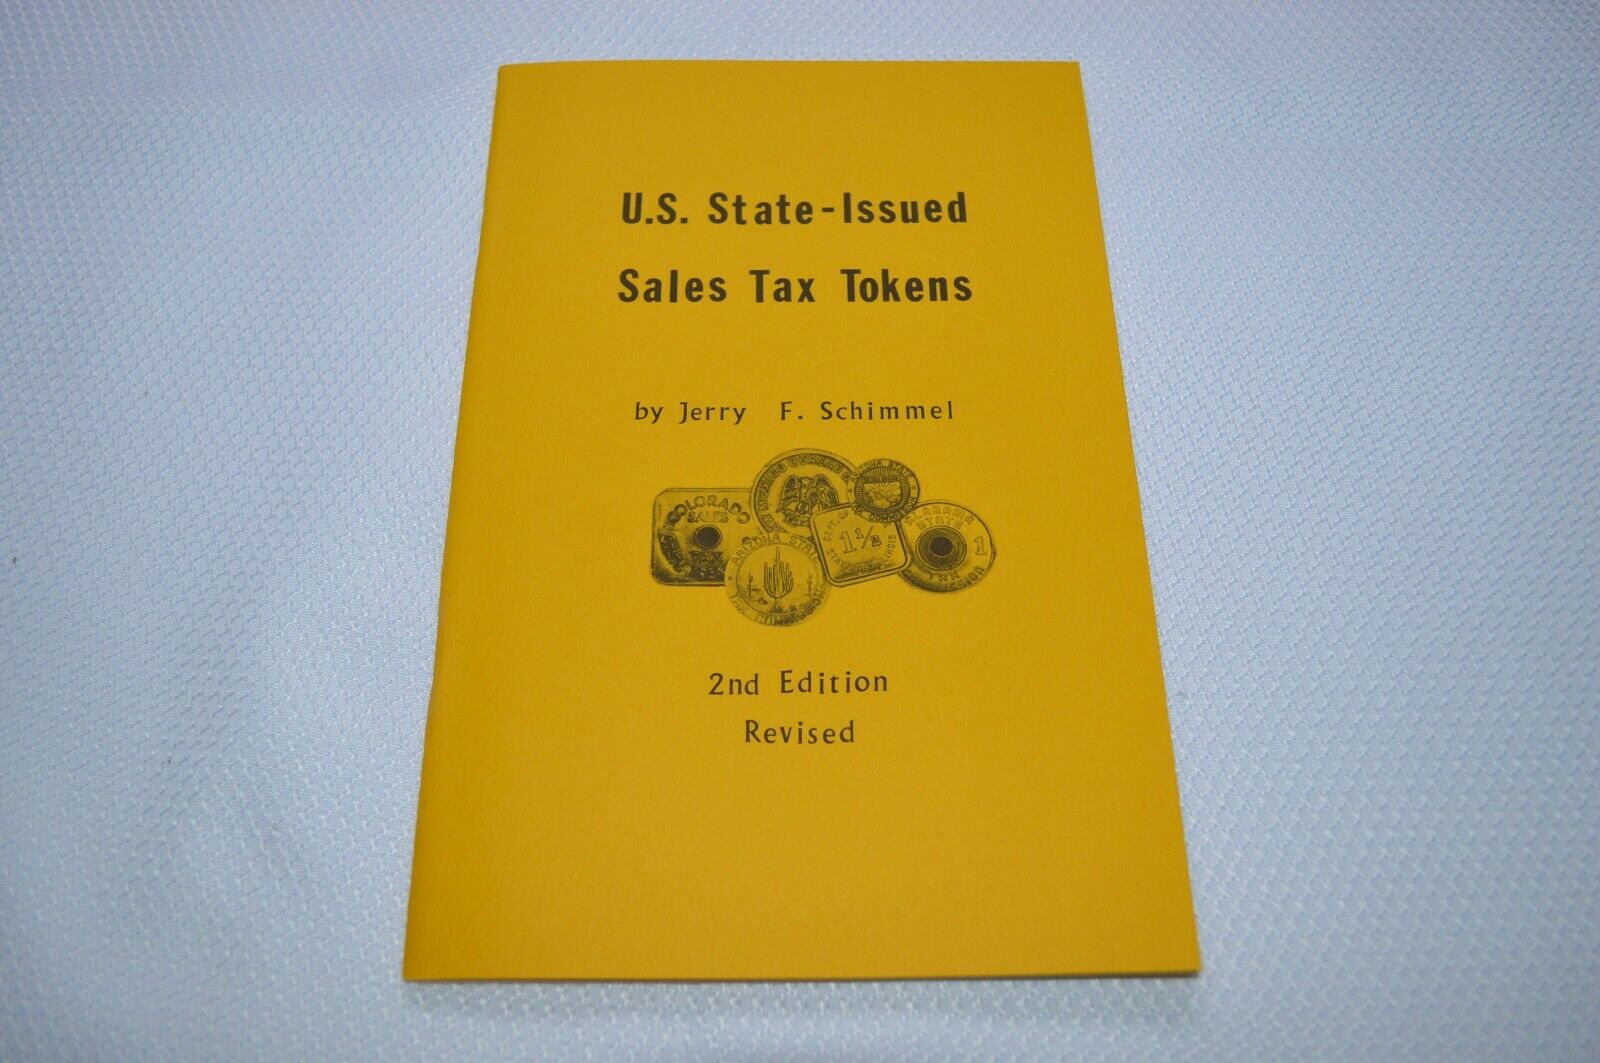 U.S. STATE-ISSUED SALES TAX TOKENS ~ JERRY F. SCHIMMEL ~ 2ND ED. REVISED ~ 1980